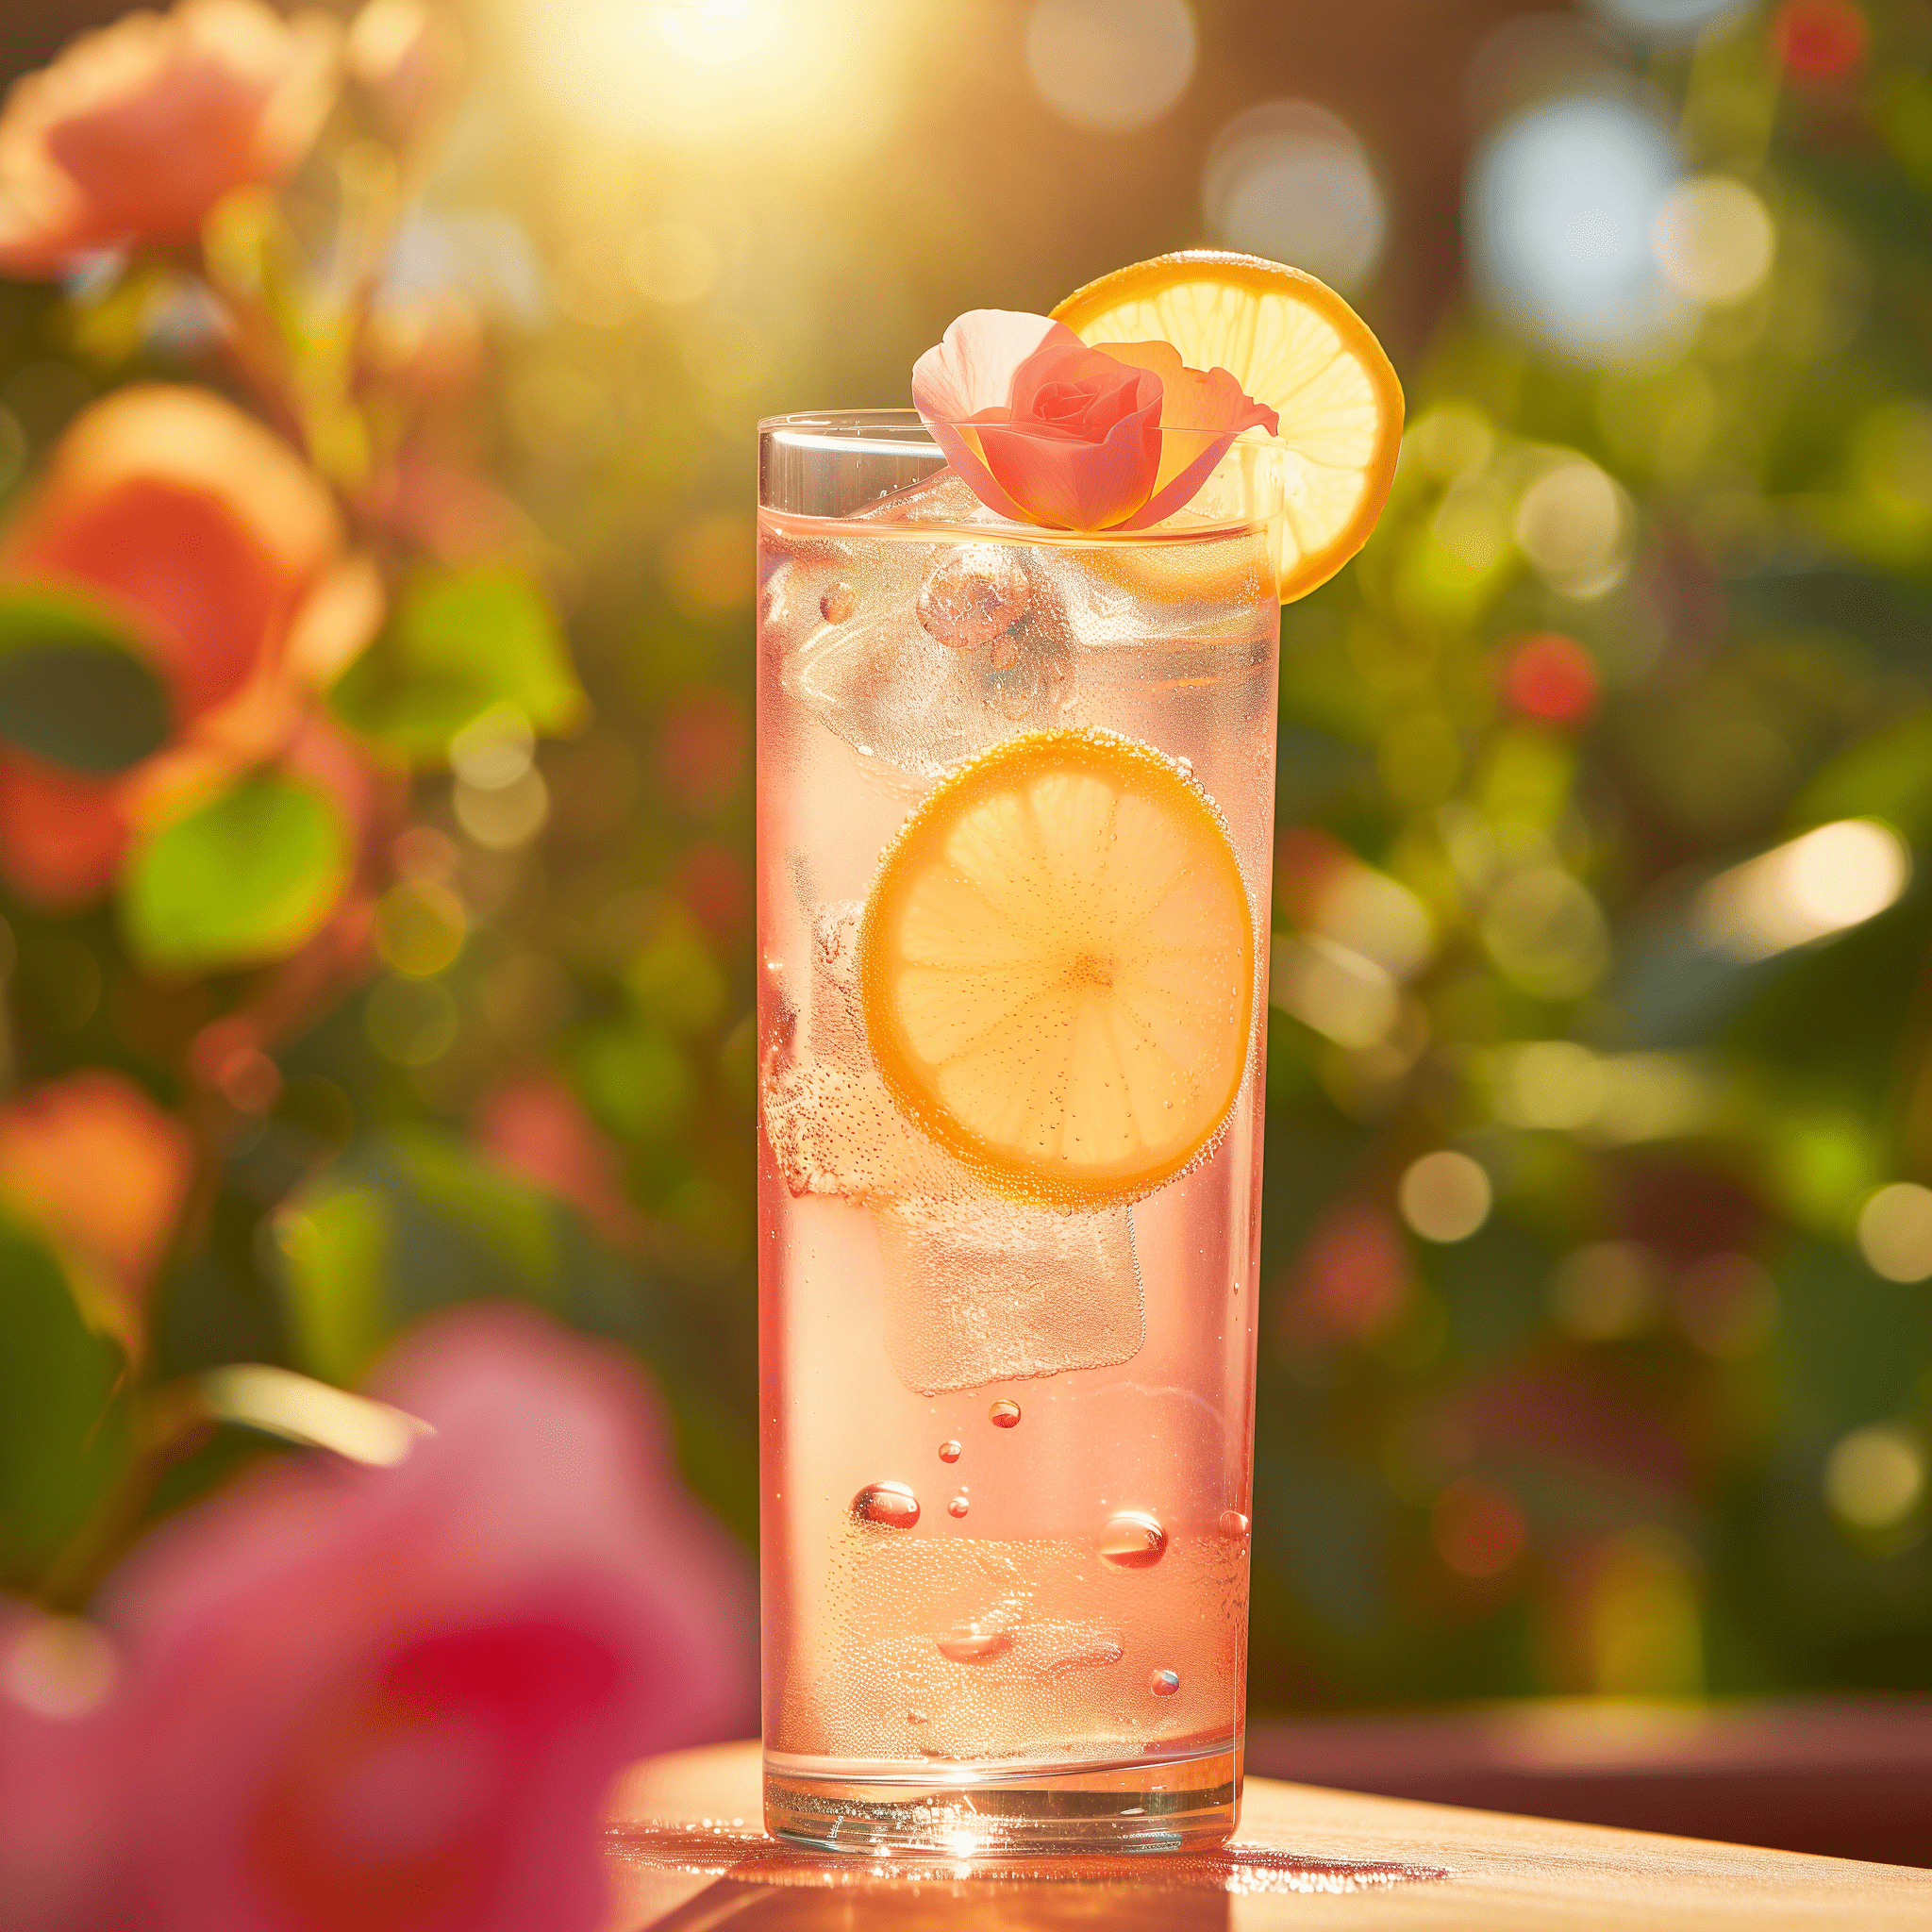 The Rose Lemonade cocktail is a harmonious blend of sweet and tart flavors. The rose syrup provides a fragrant sweetness that is perfectly balanced by the bright acidity of fresh lemon juice. The sparkling water adds a bubbly texture that makes the drink light and refreshing.